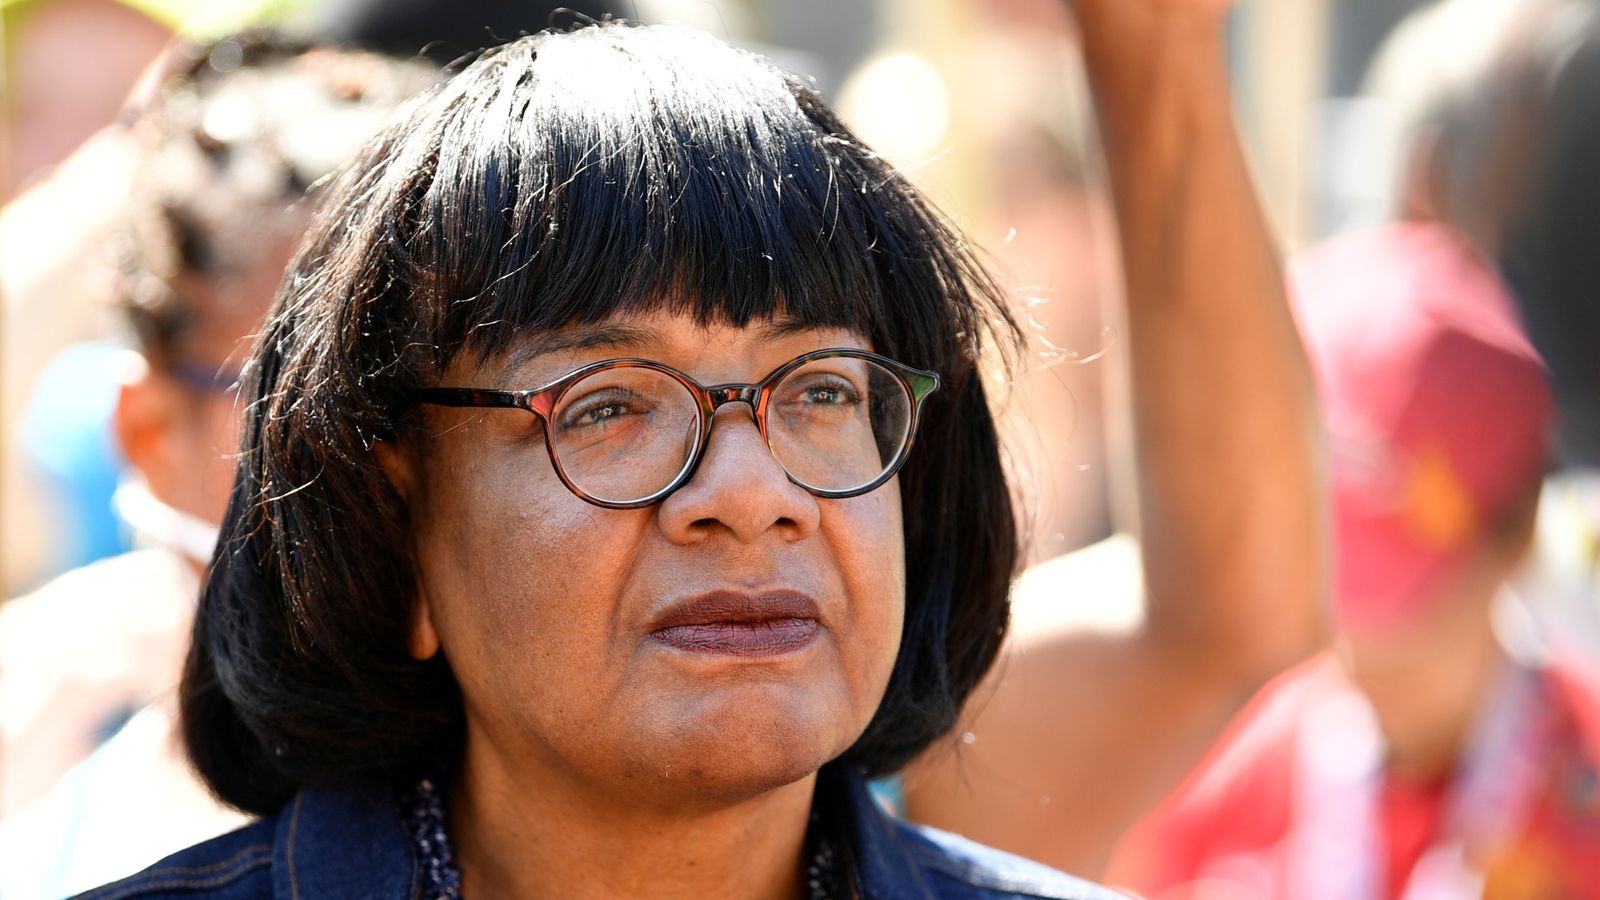 Diane Abbott accused of 'hateful antisemitism' after suggesting Jews do not face racism